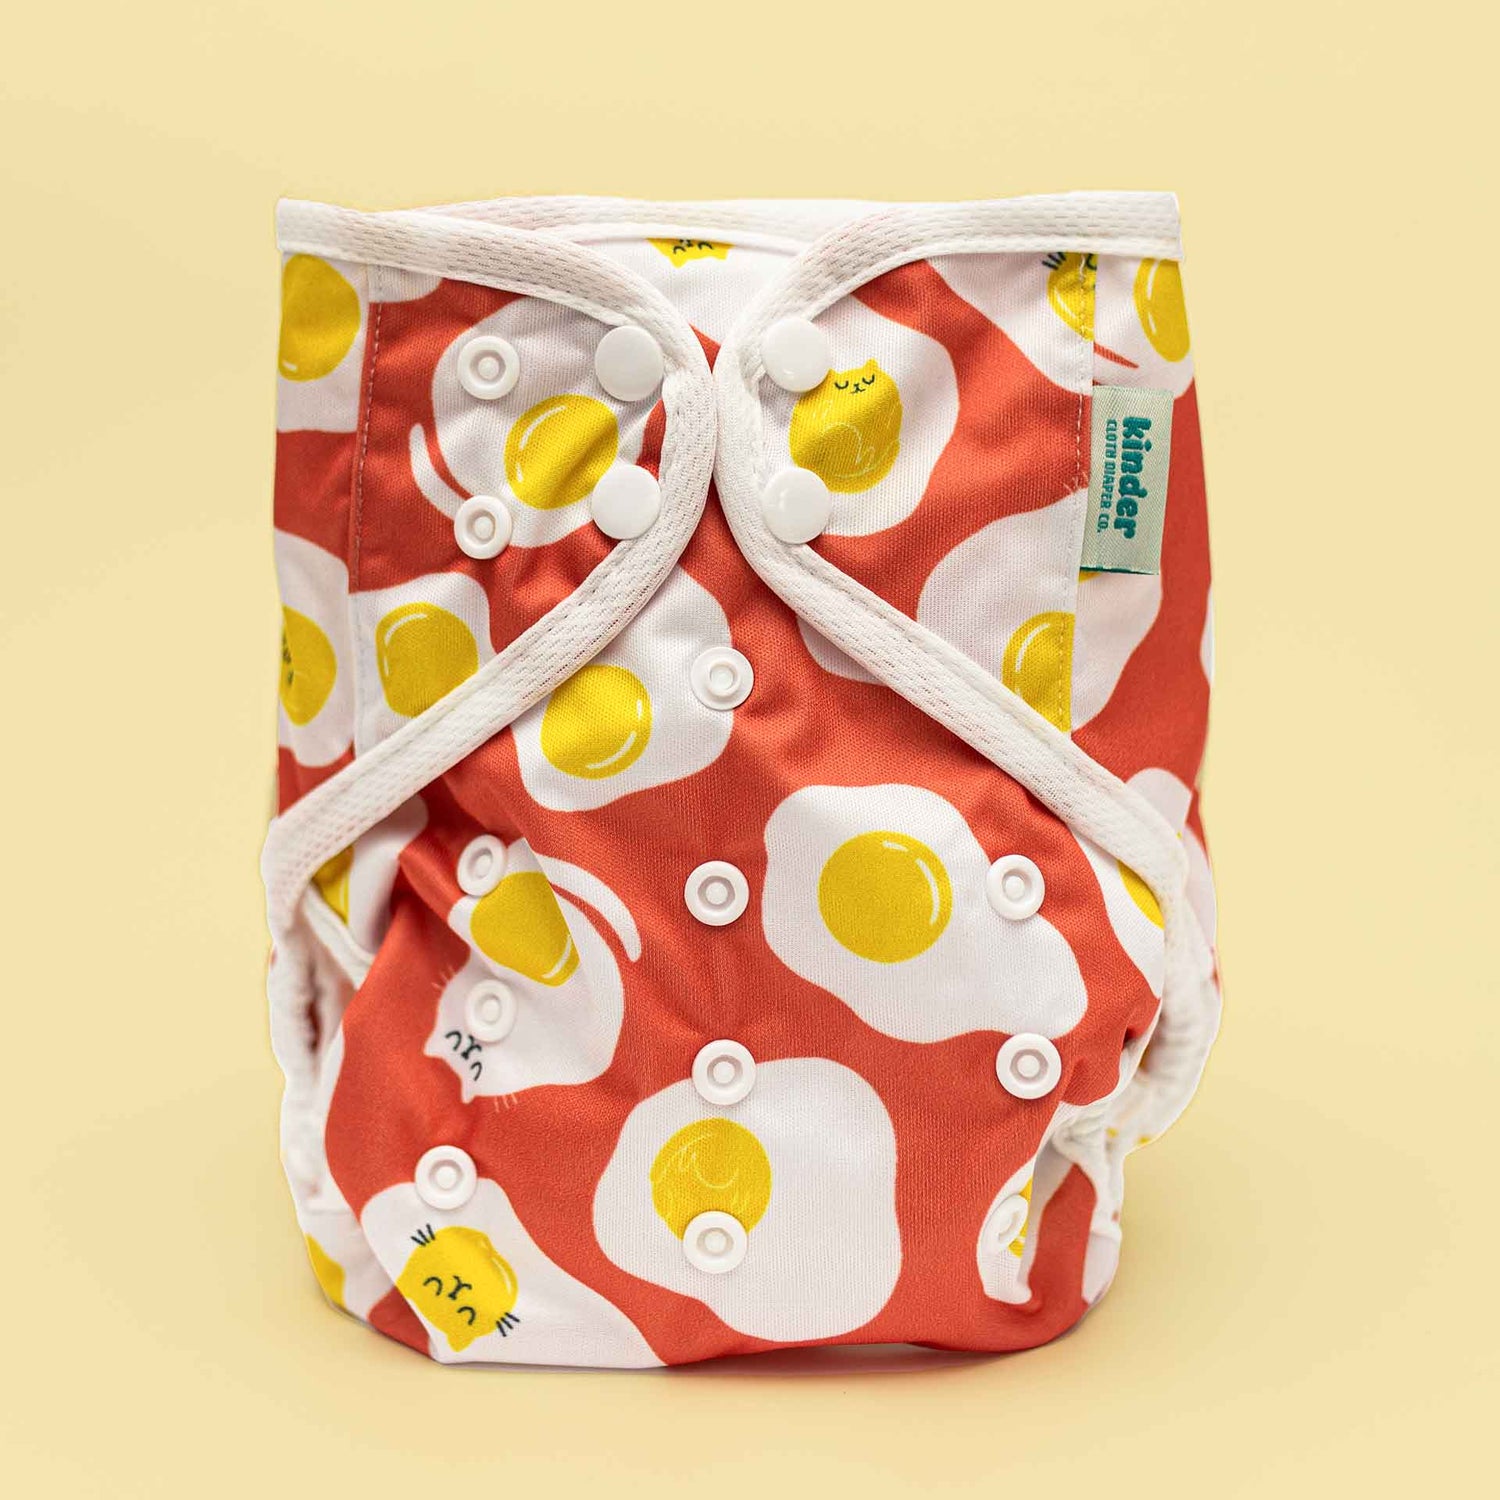 Cat Eggs Modern Reusable Diaper Cover Cloth Nappy Whimsical Bold Bright Playful Best cloth diaper covers USA